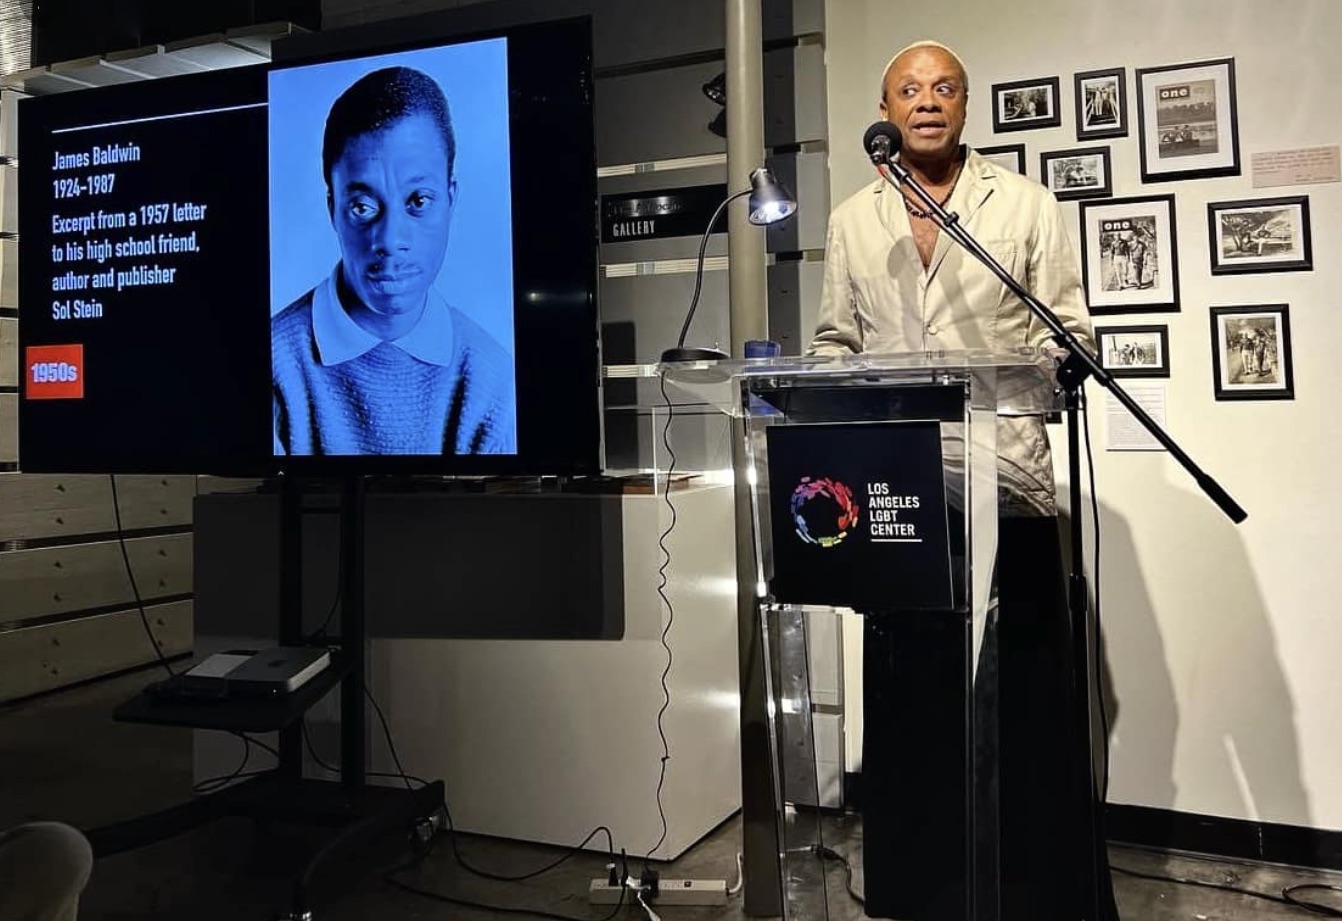 An image of Paul Outlaw at a Podium next to a presentation on James Baldwin.